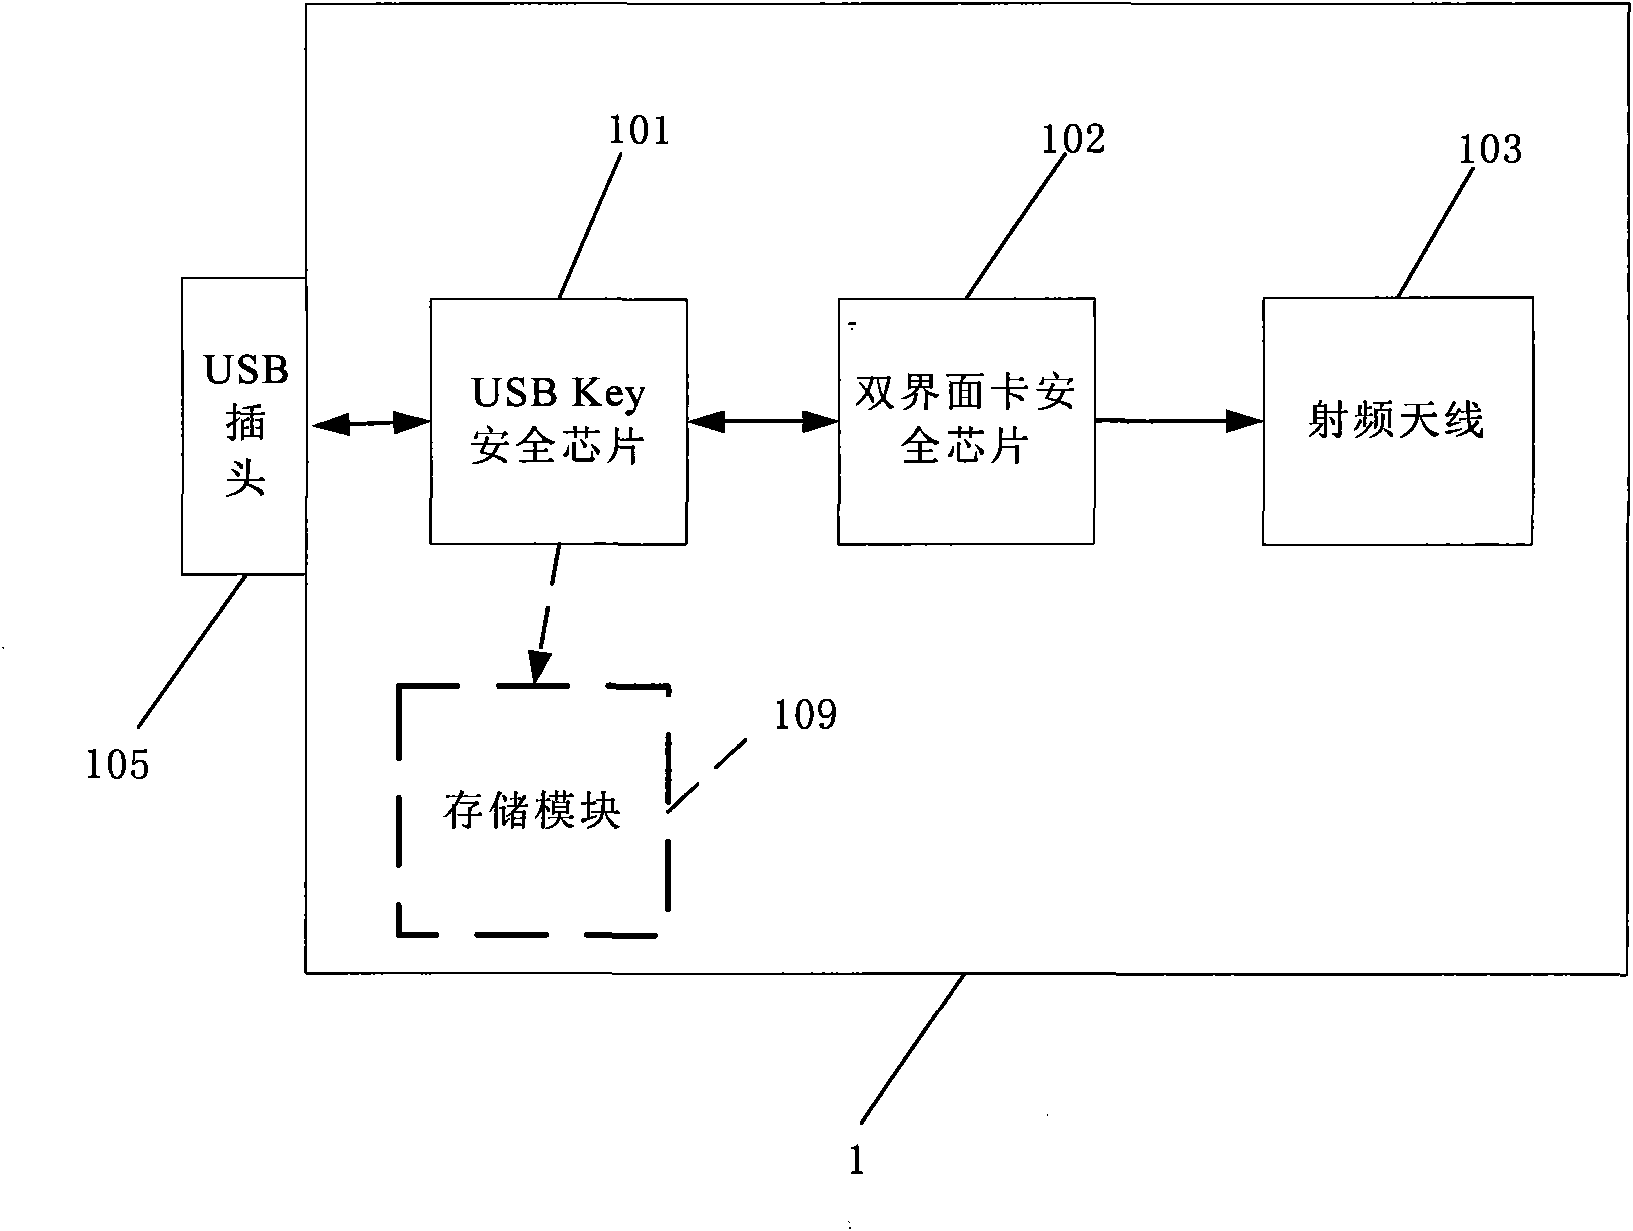 Encrypting and authenticating equipment with dual safety chips